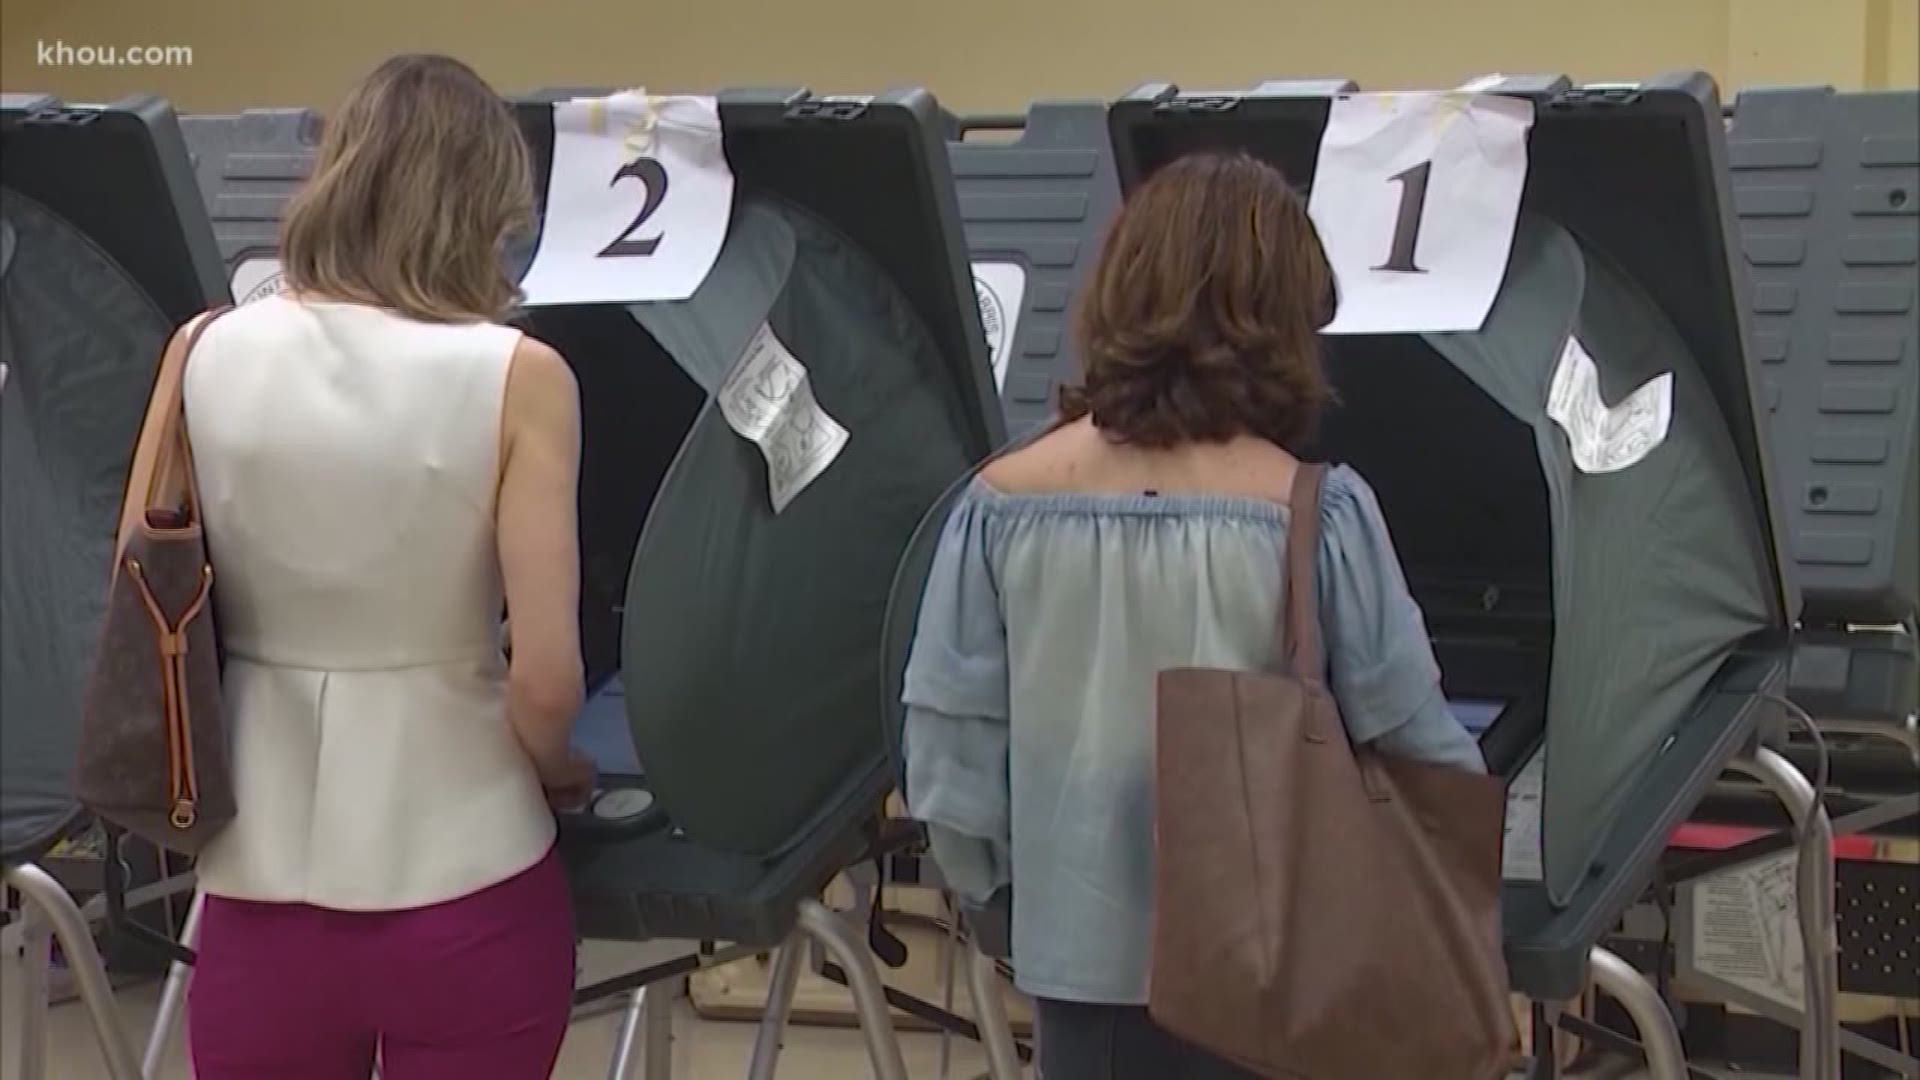 KHOU 11 political analyst Bob Stein said changes allowing people to vote anywhere in the county helped with turnout.